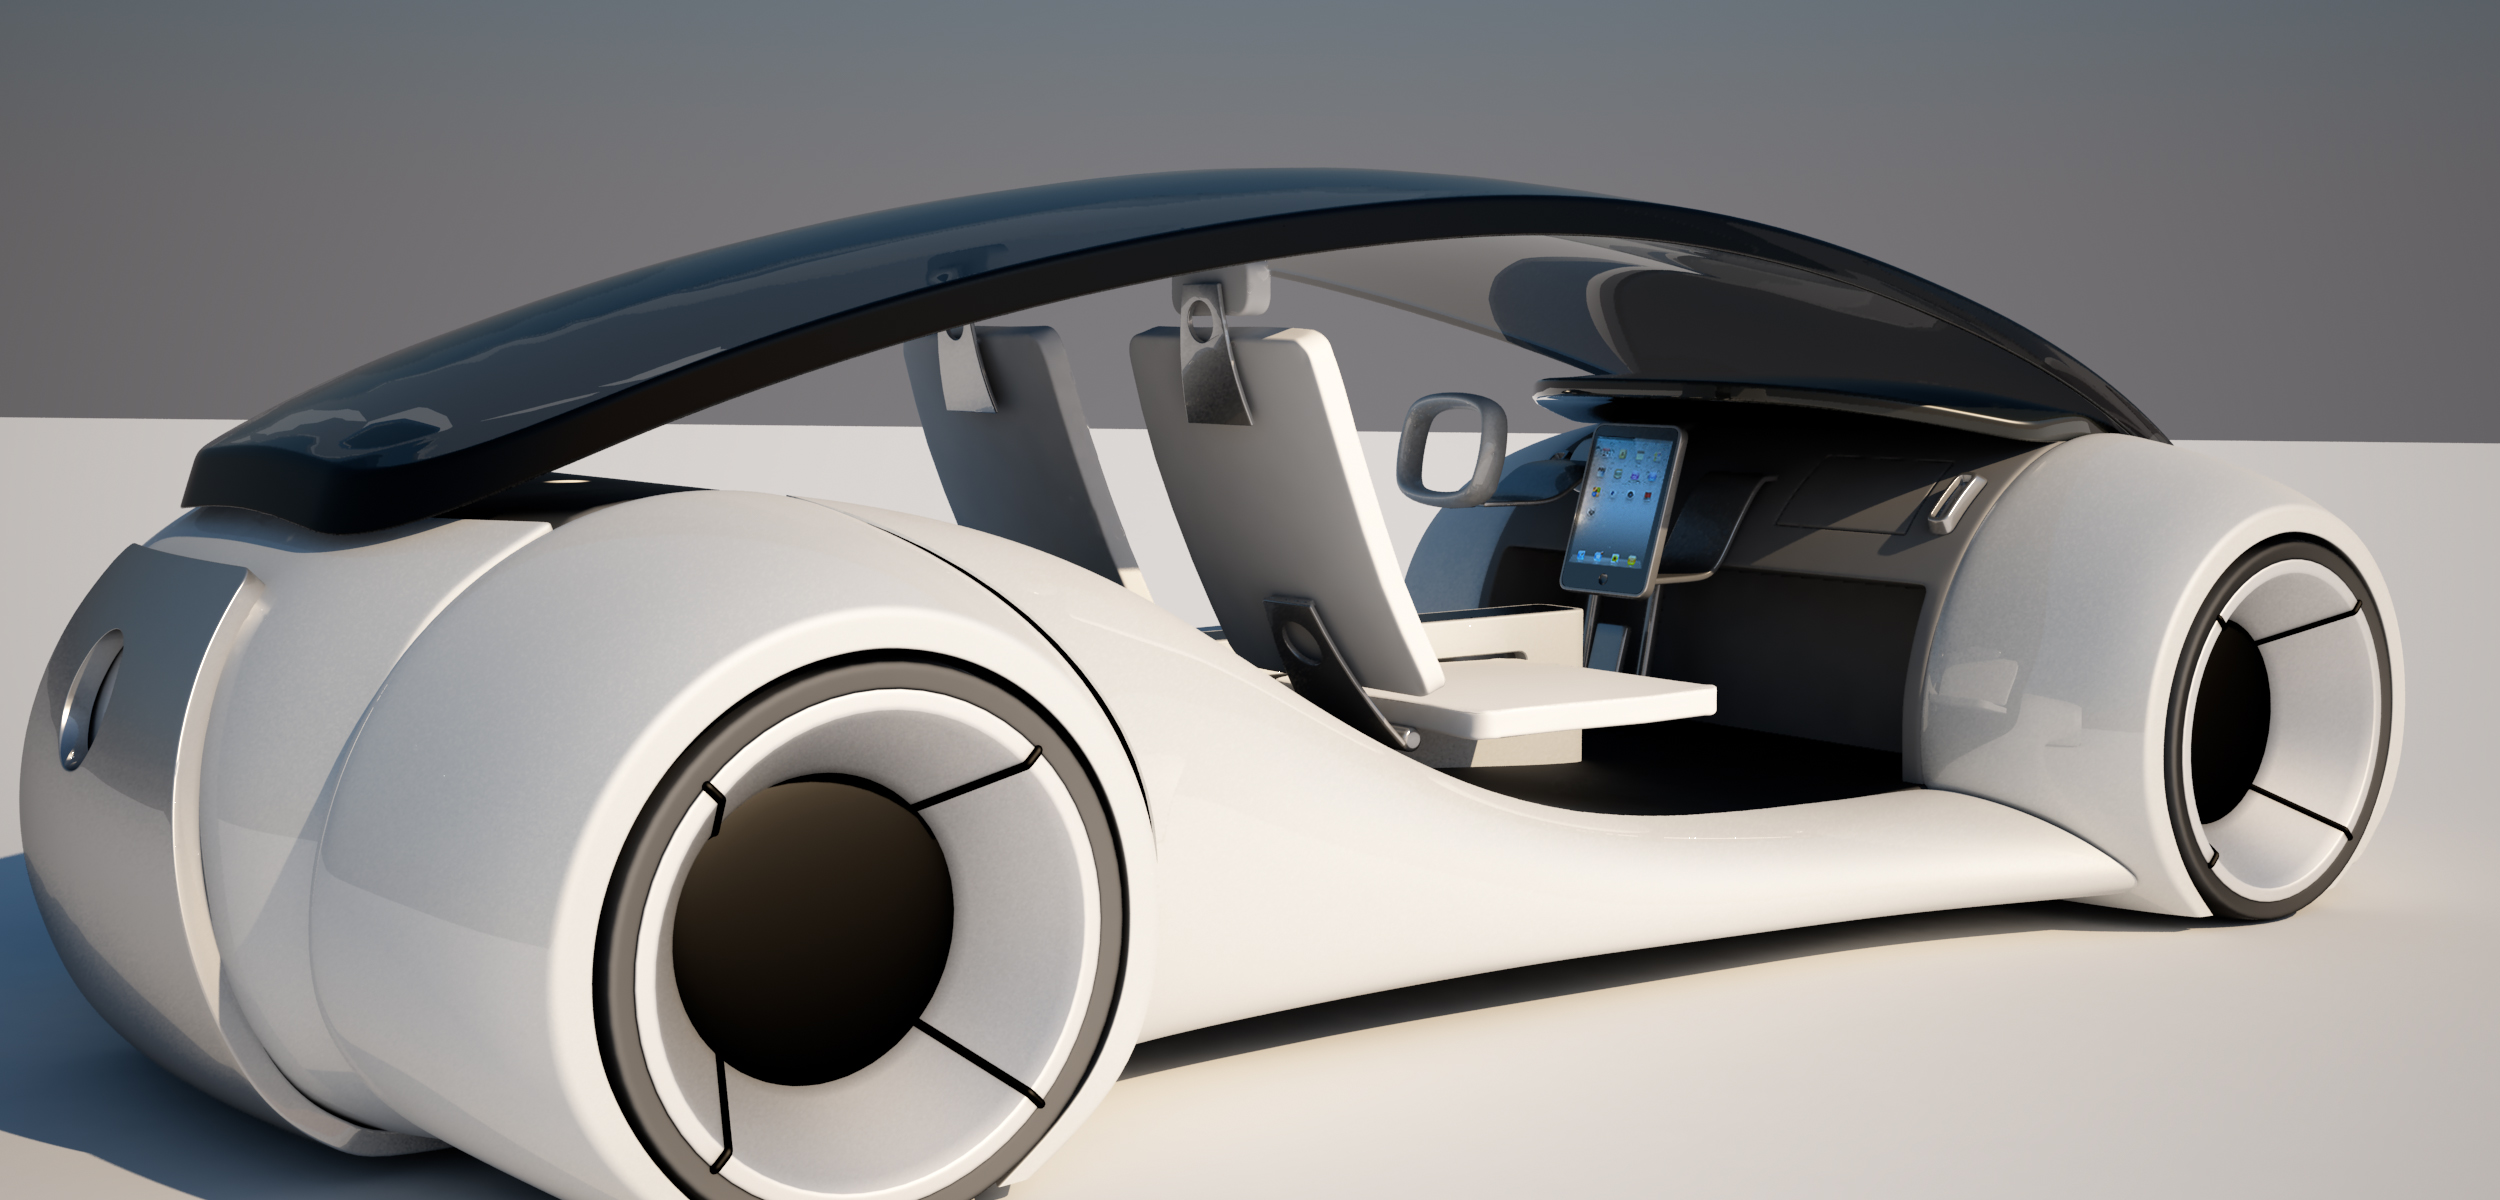 Apple iCar Concept, The Futuristic Electric Car From Apple